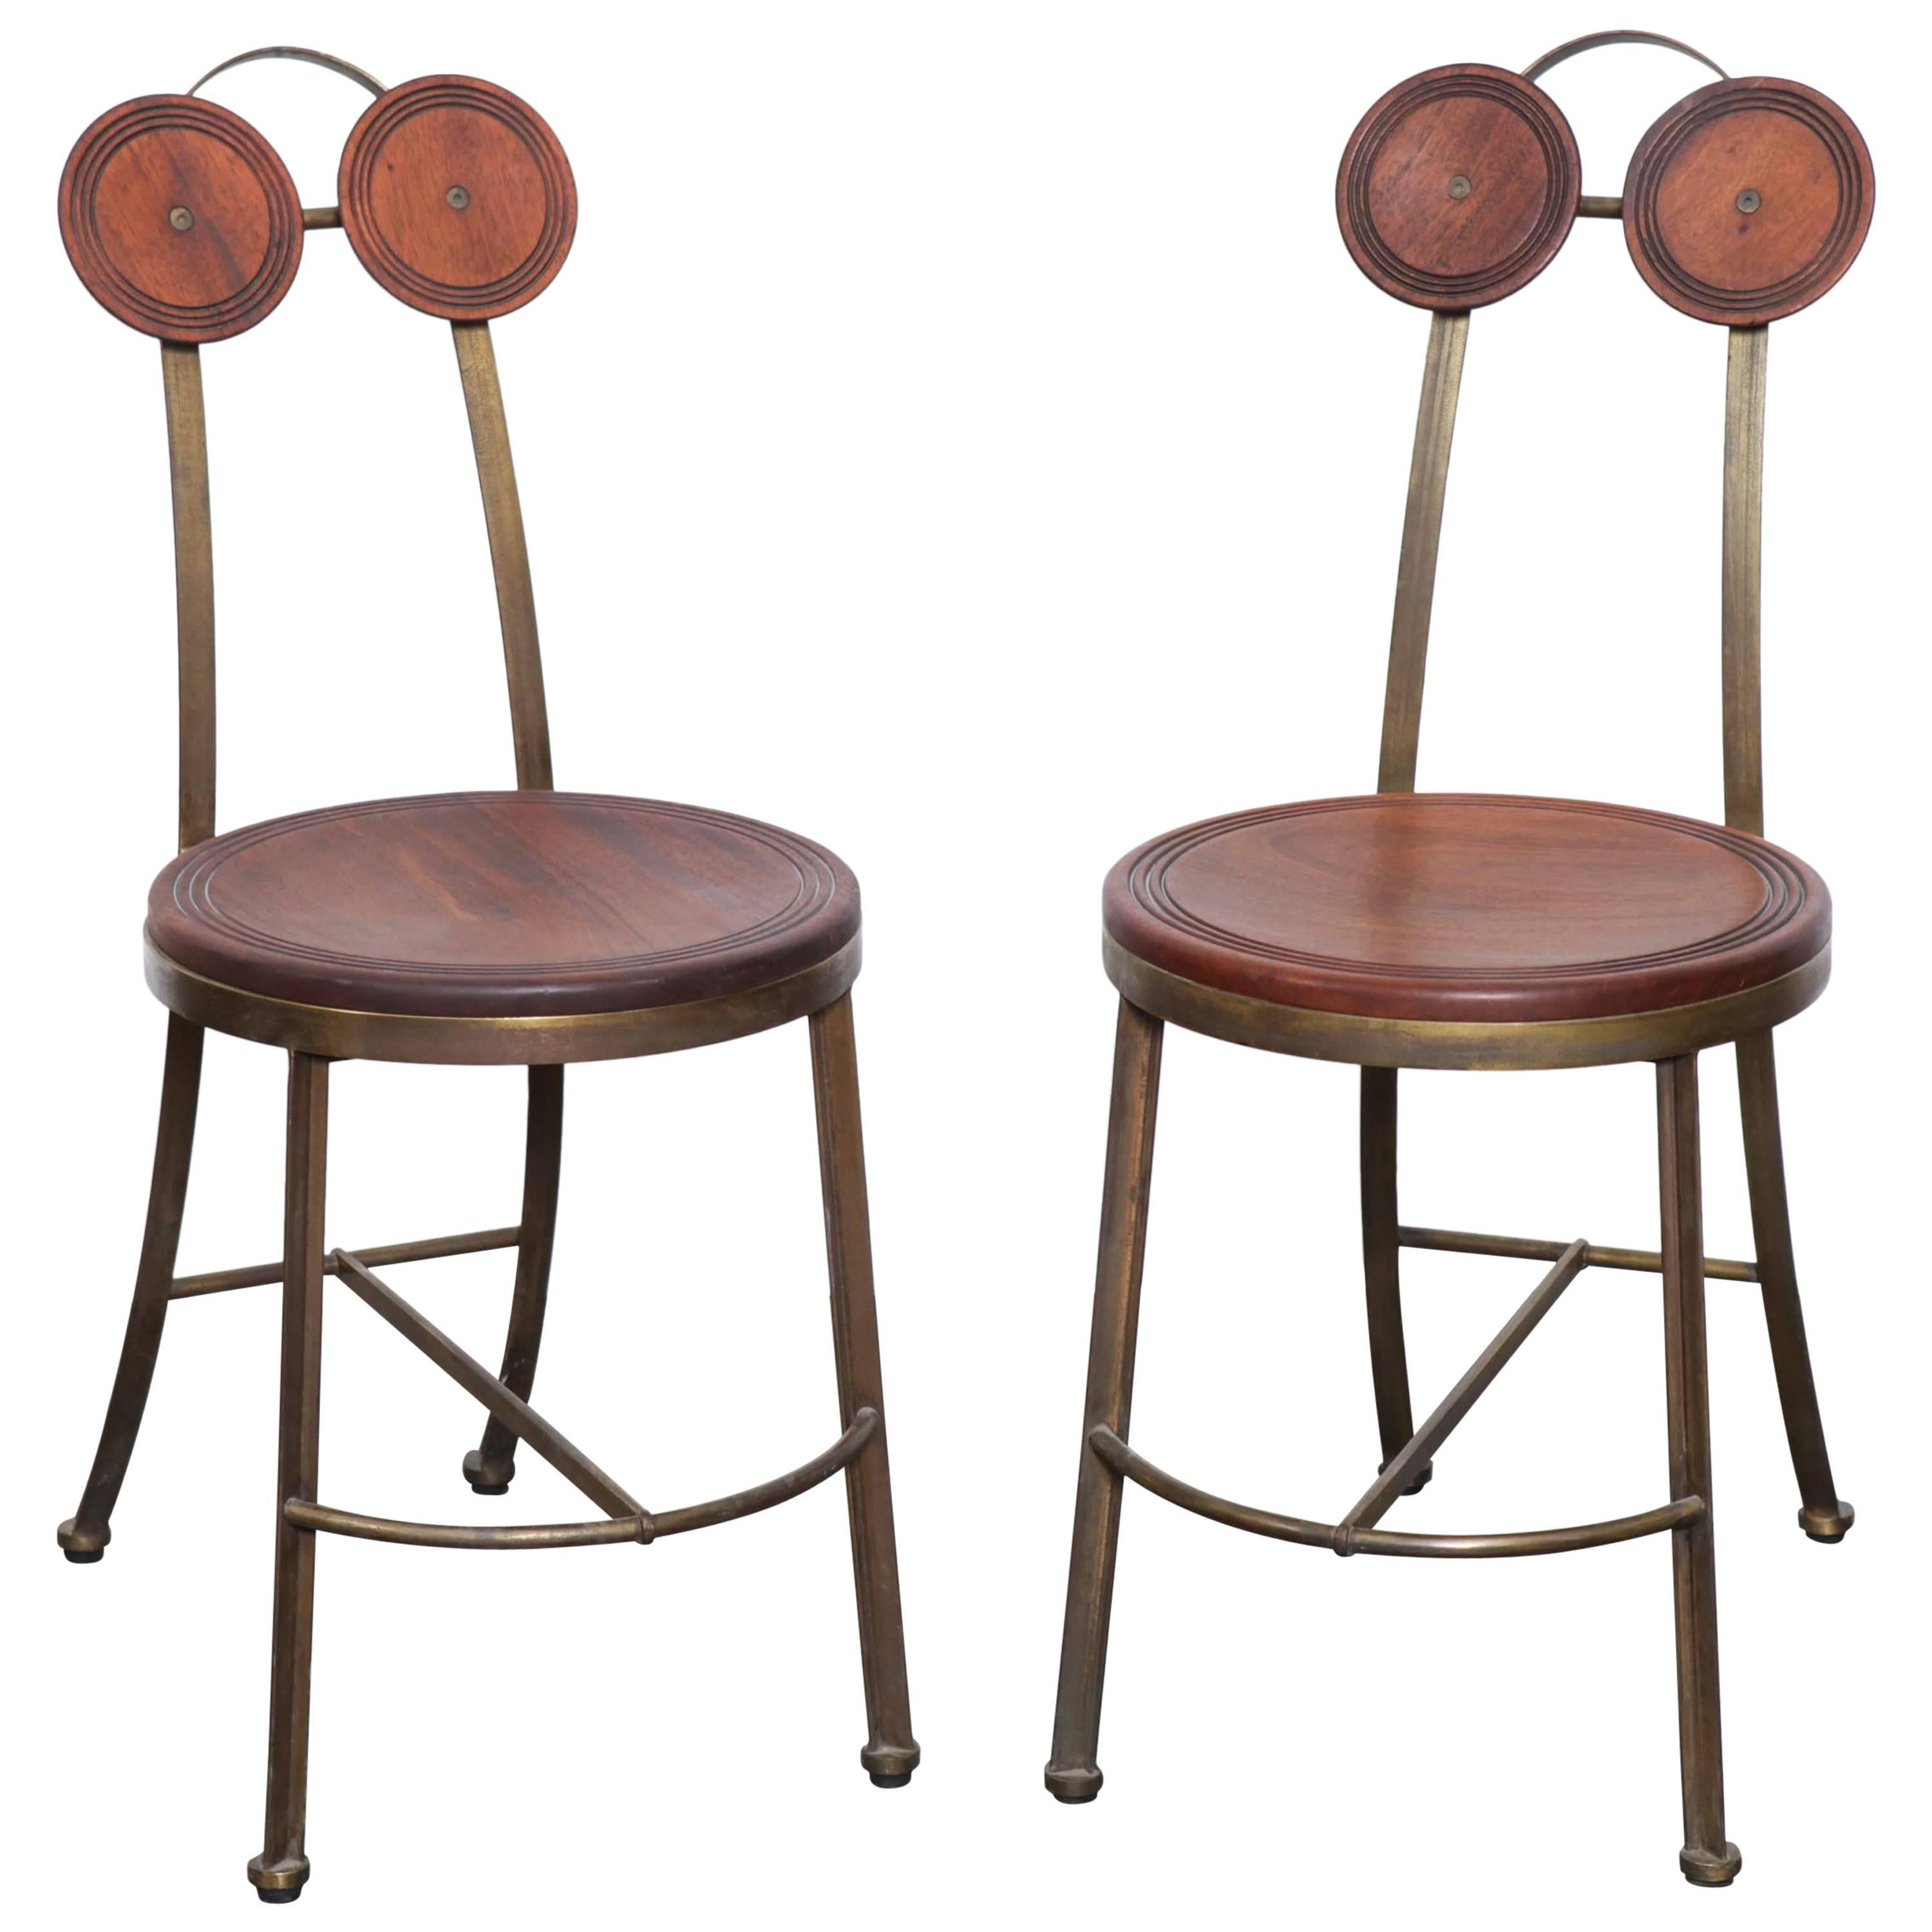 Pair of Bronze and Freijo Wood Chair by Pedro Useche